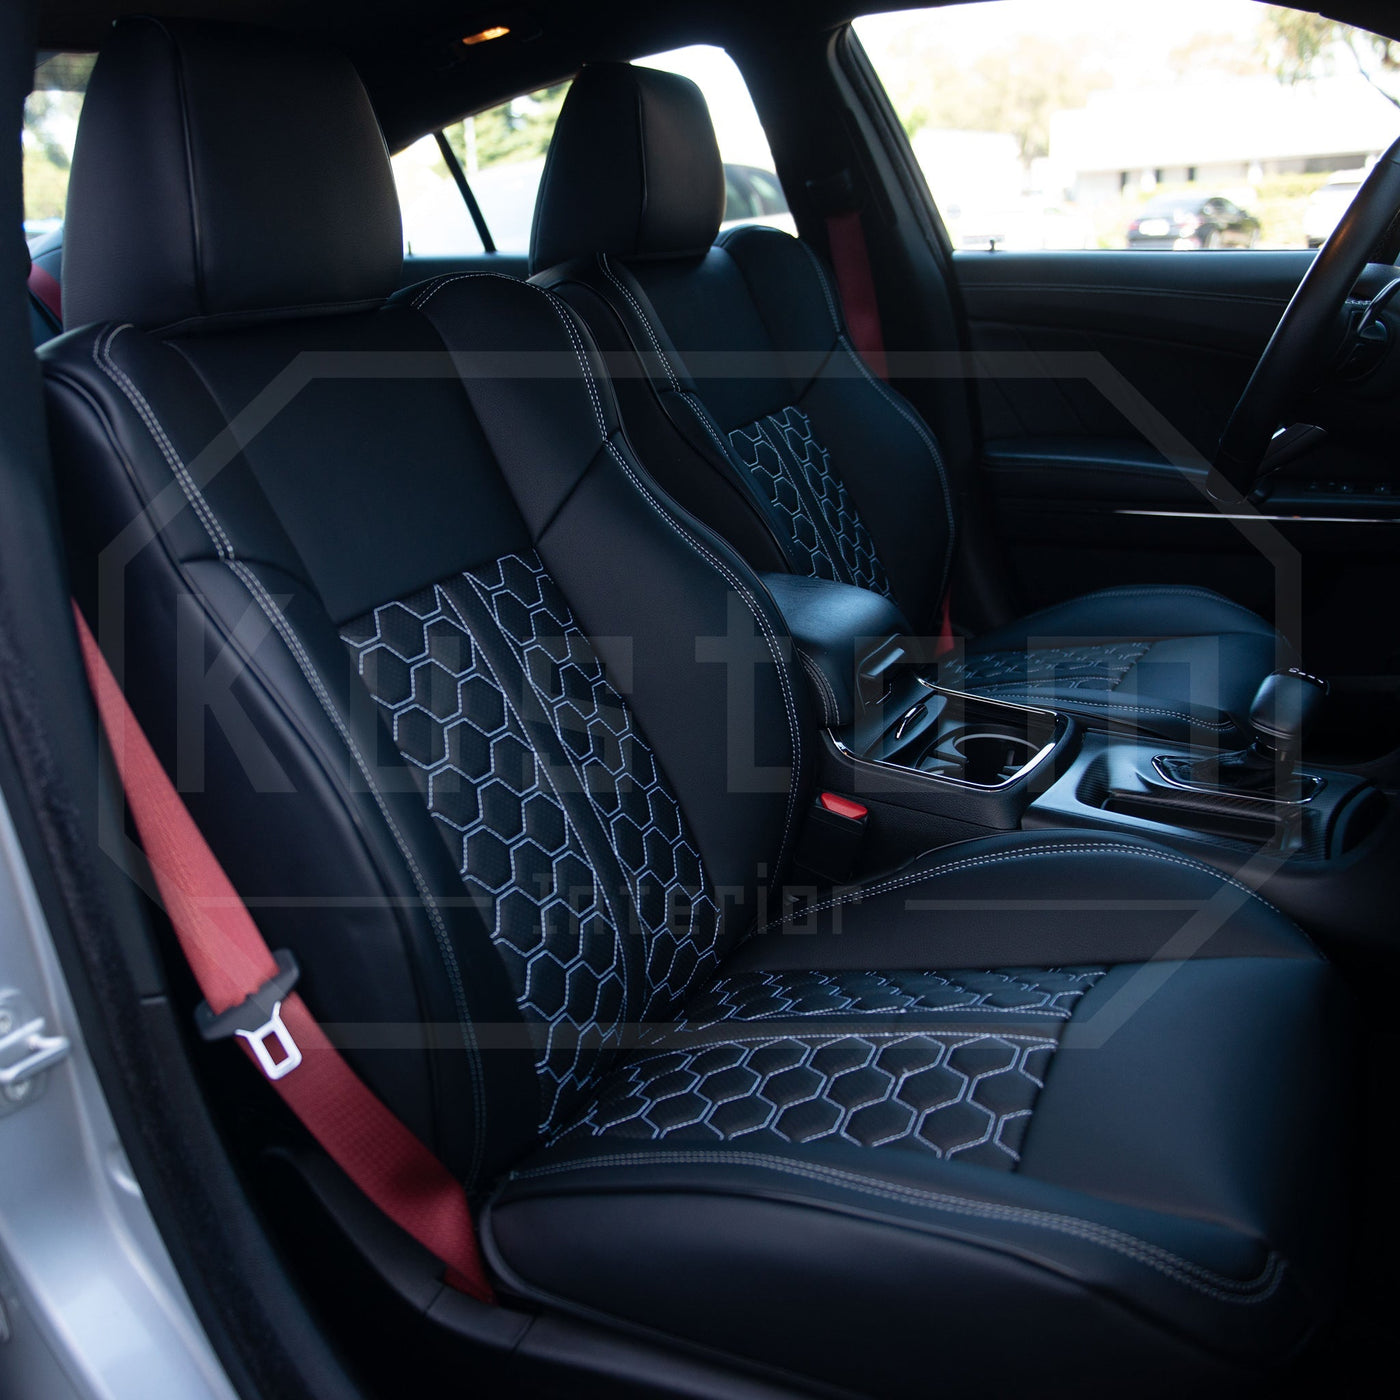 2015-Up Dodge Challenger Custom Leather Seat Covers (Performance Seats)